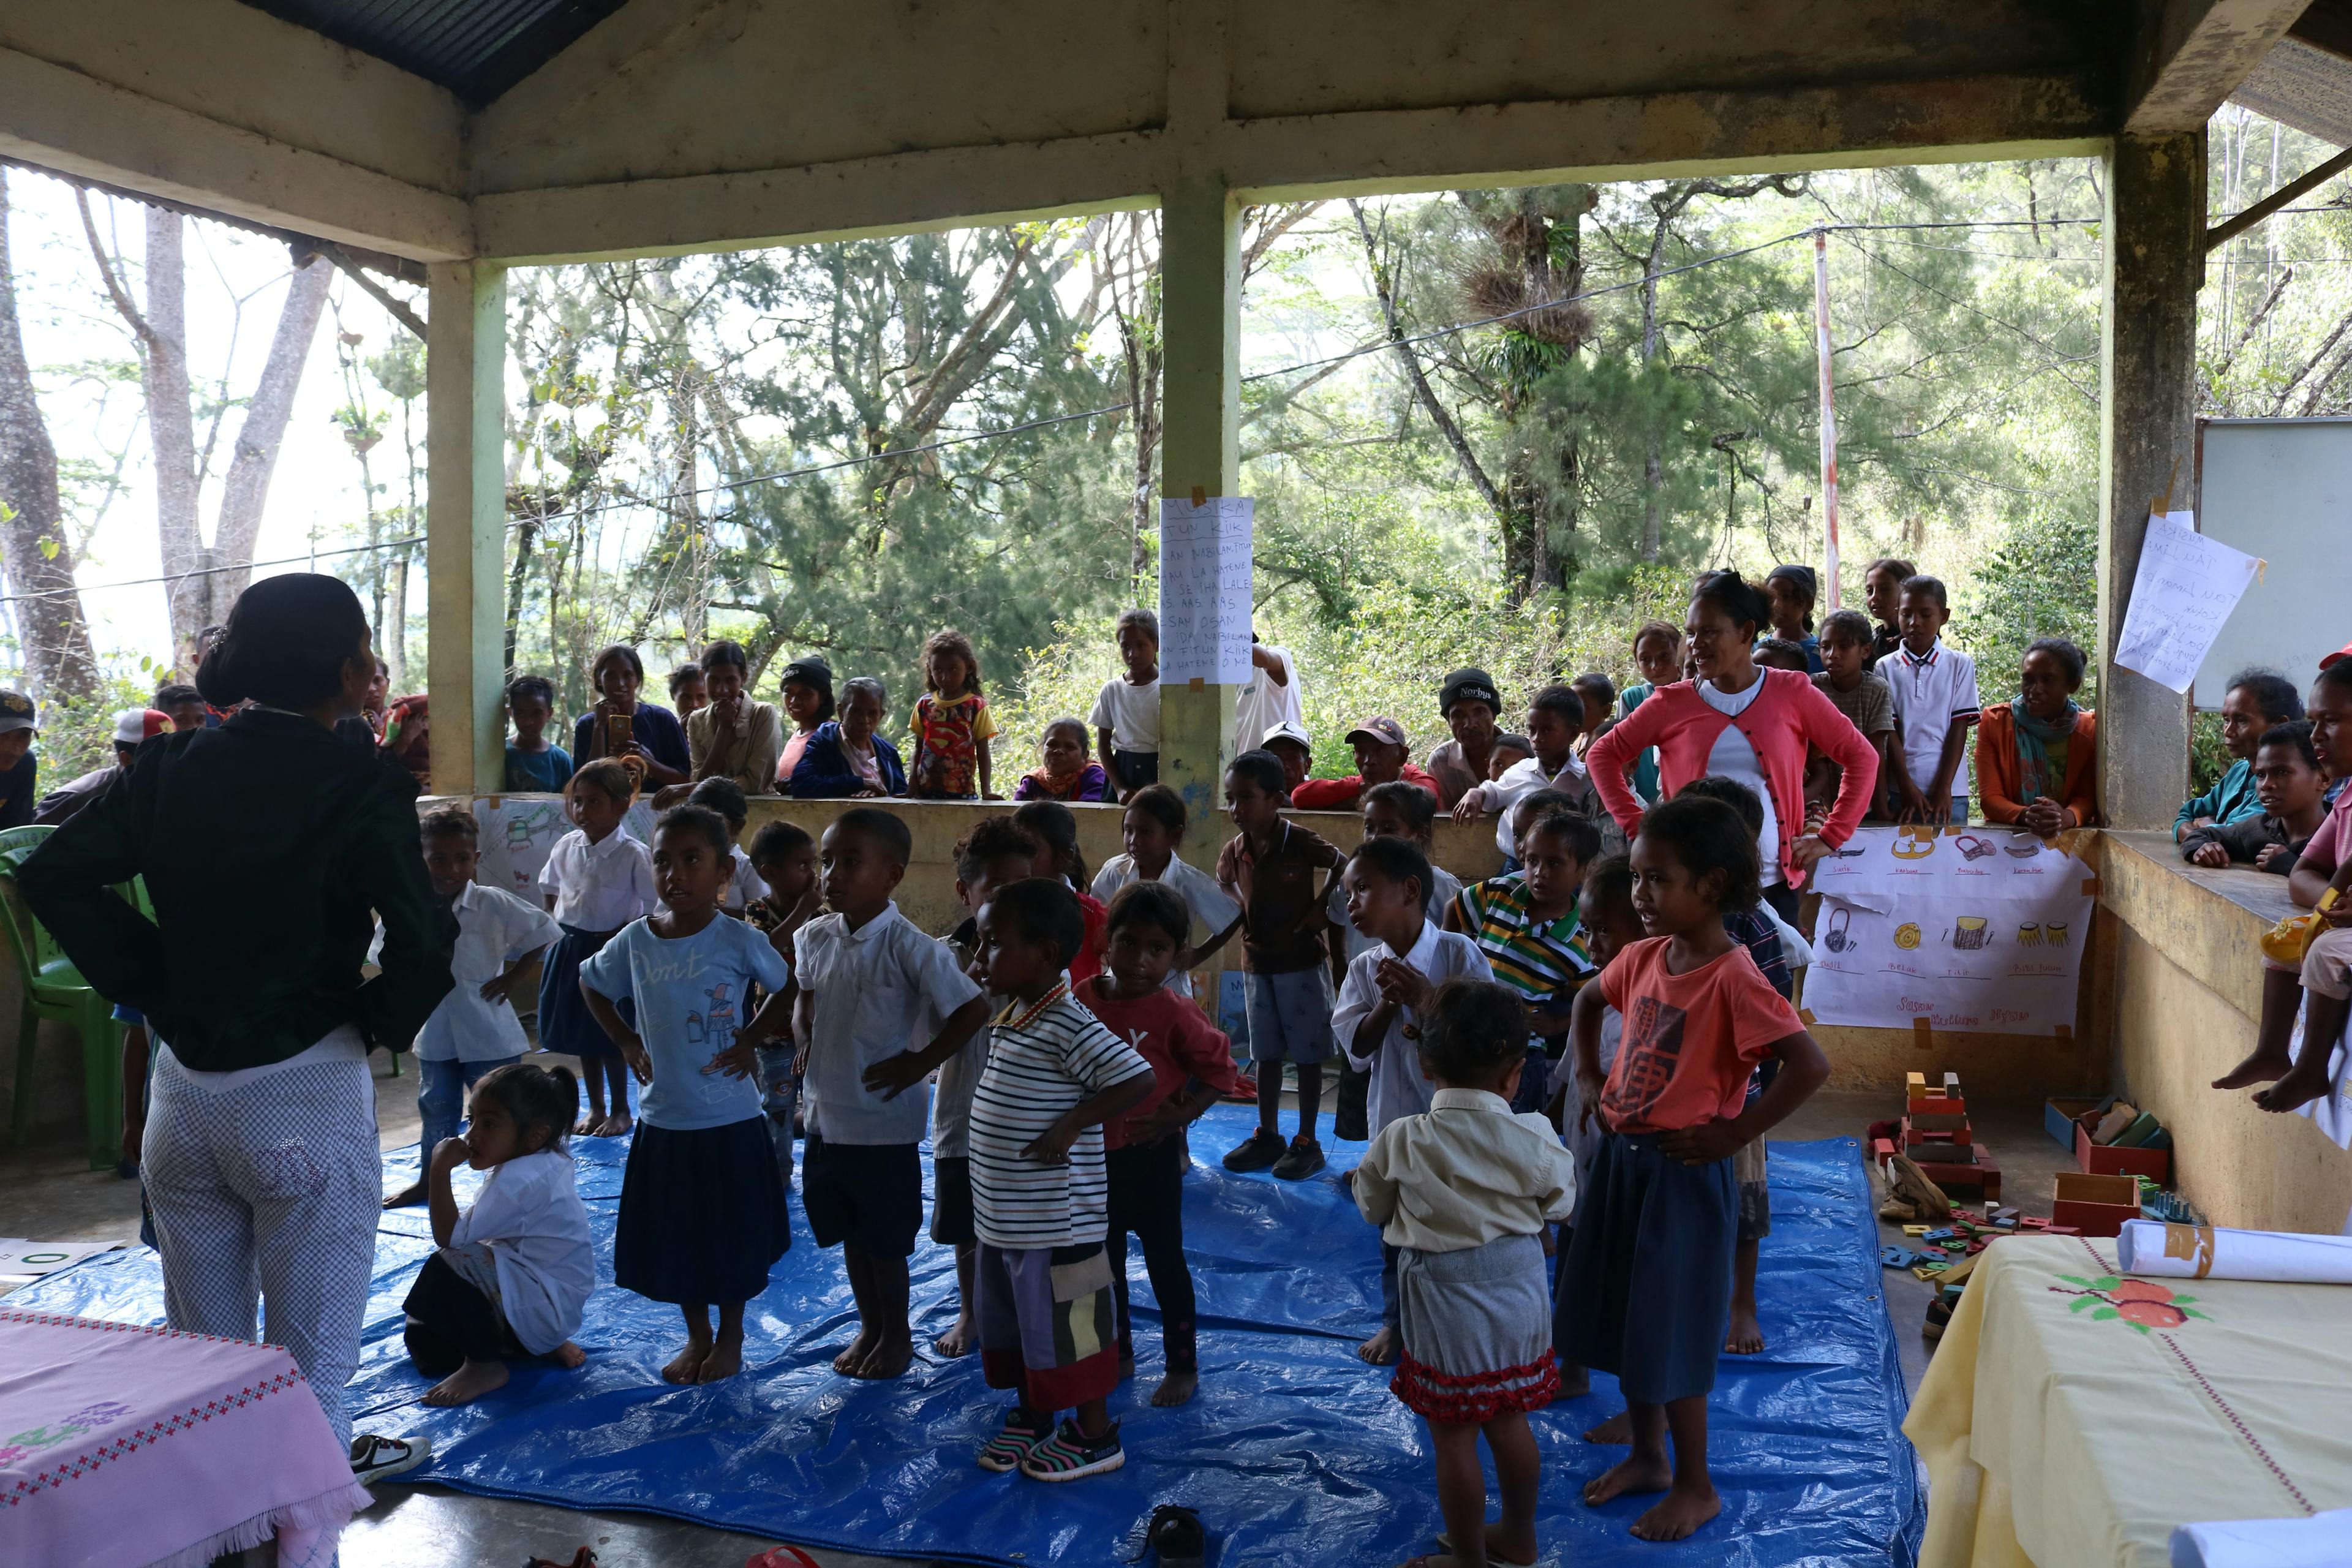 Students of Kairia preschool learning a song and dance during class. Families and community members also gathered around the classroom for our arrival.